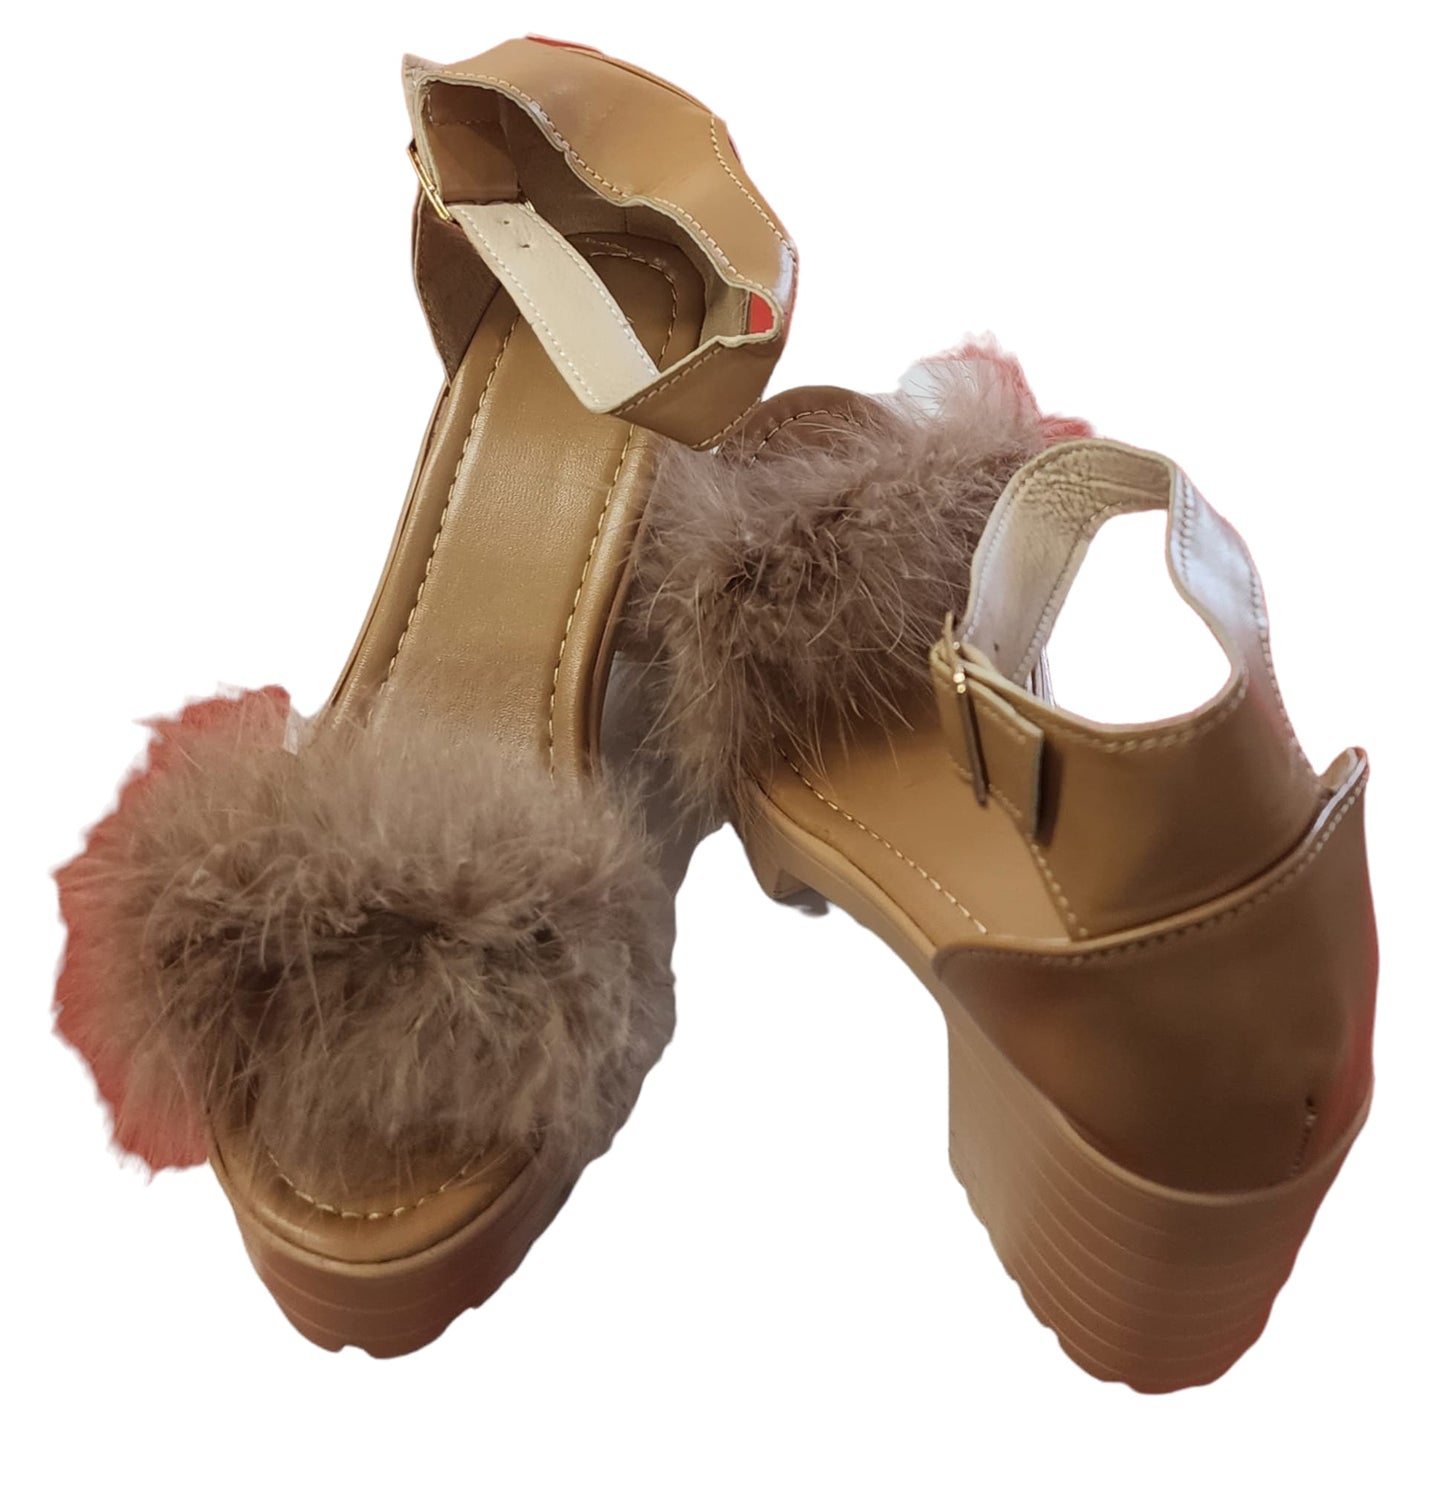 Ladies wedge shoes ankle strap with fur.